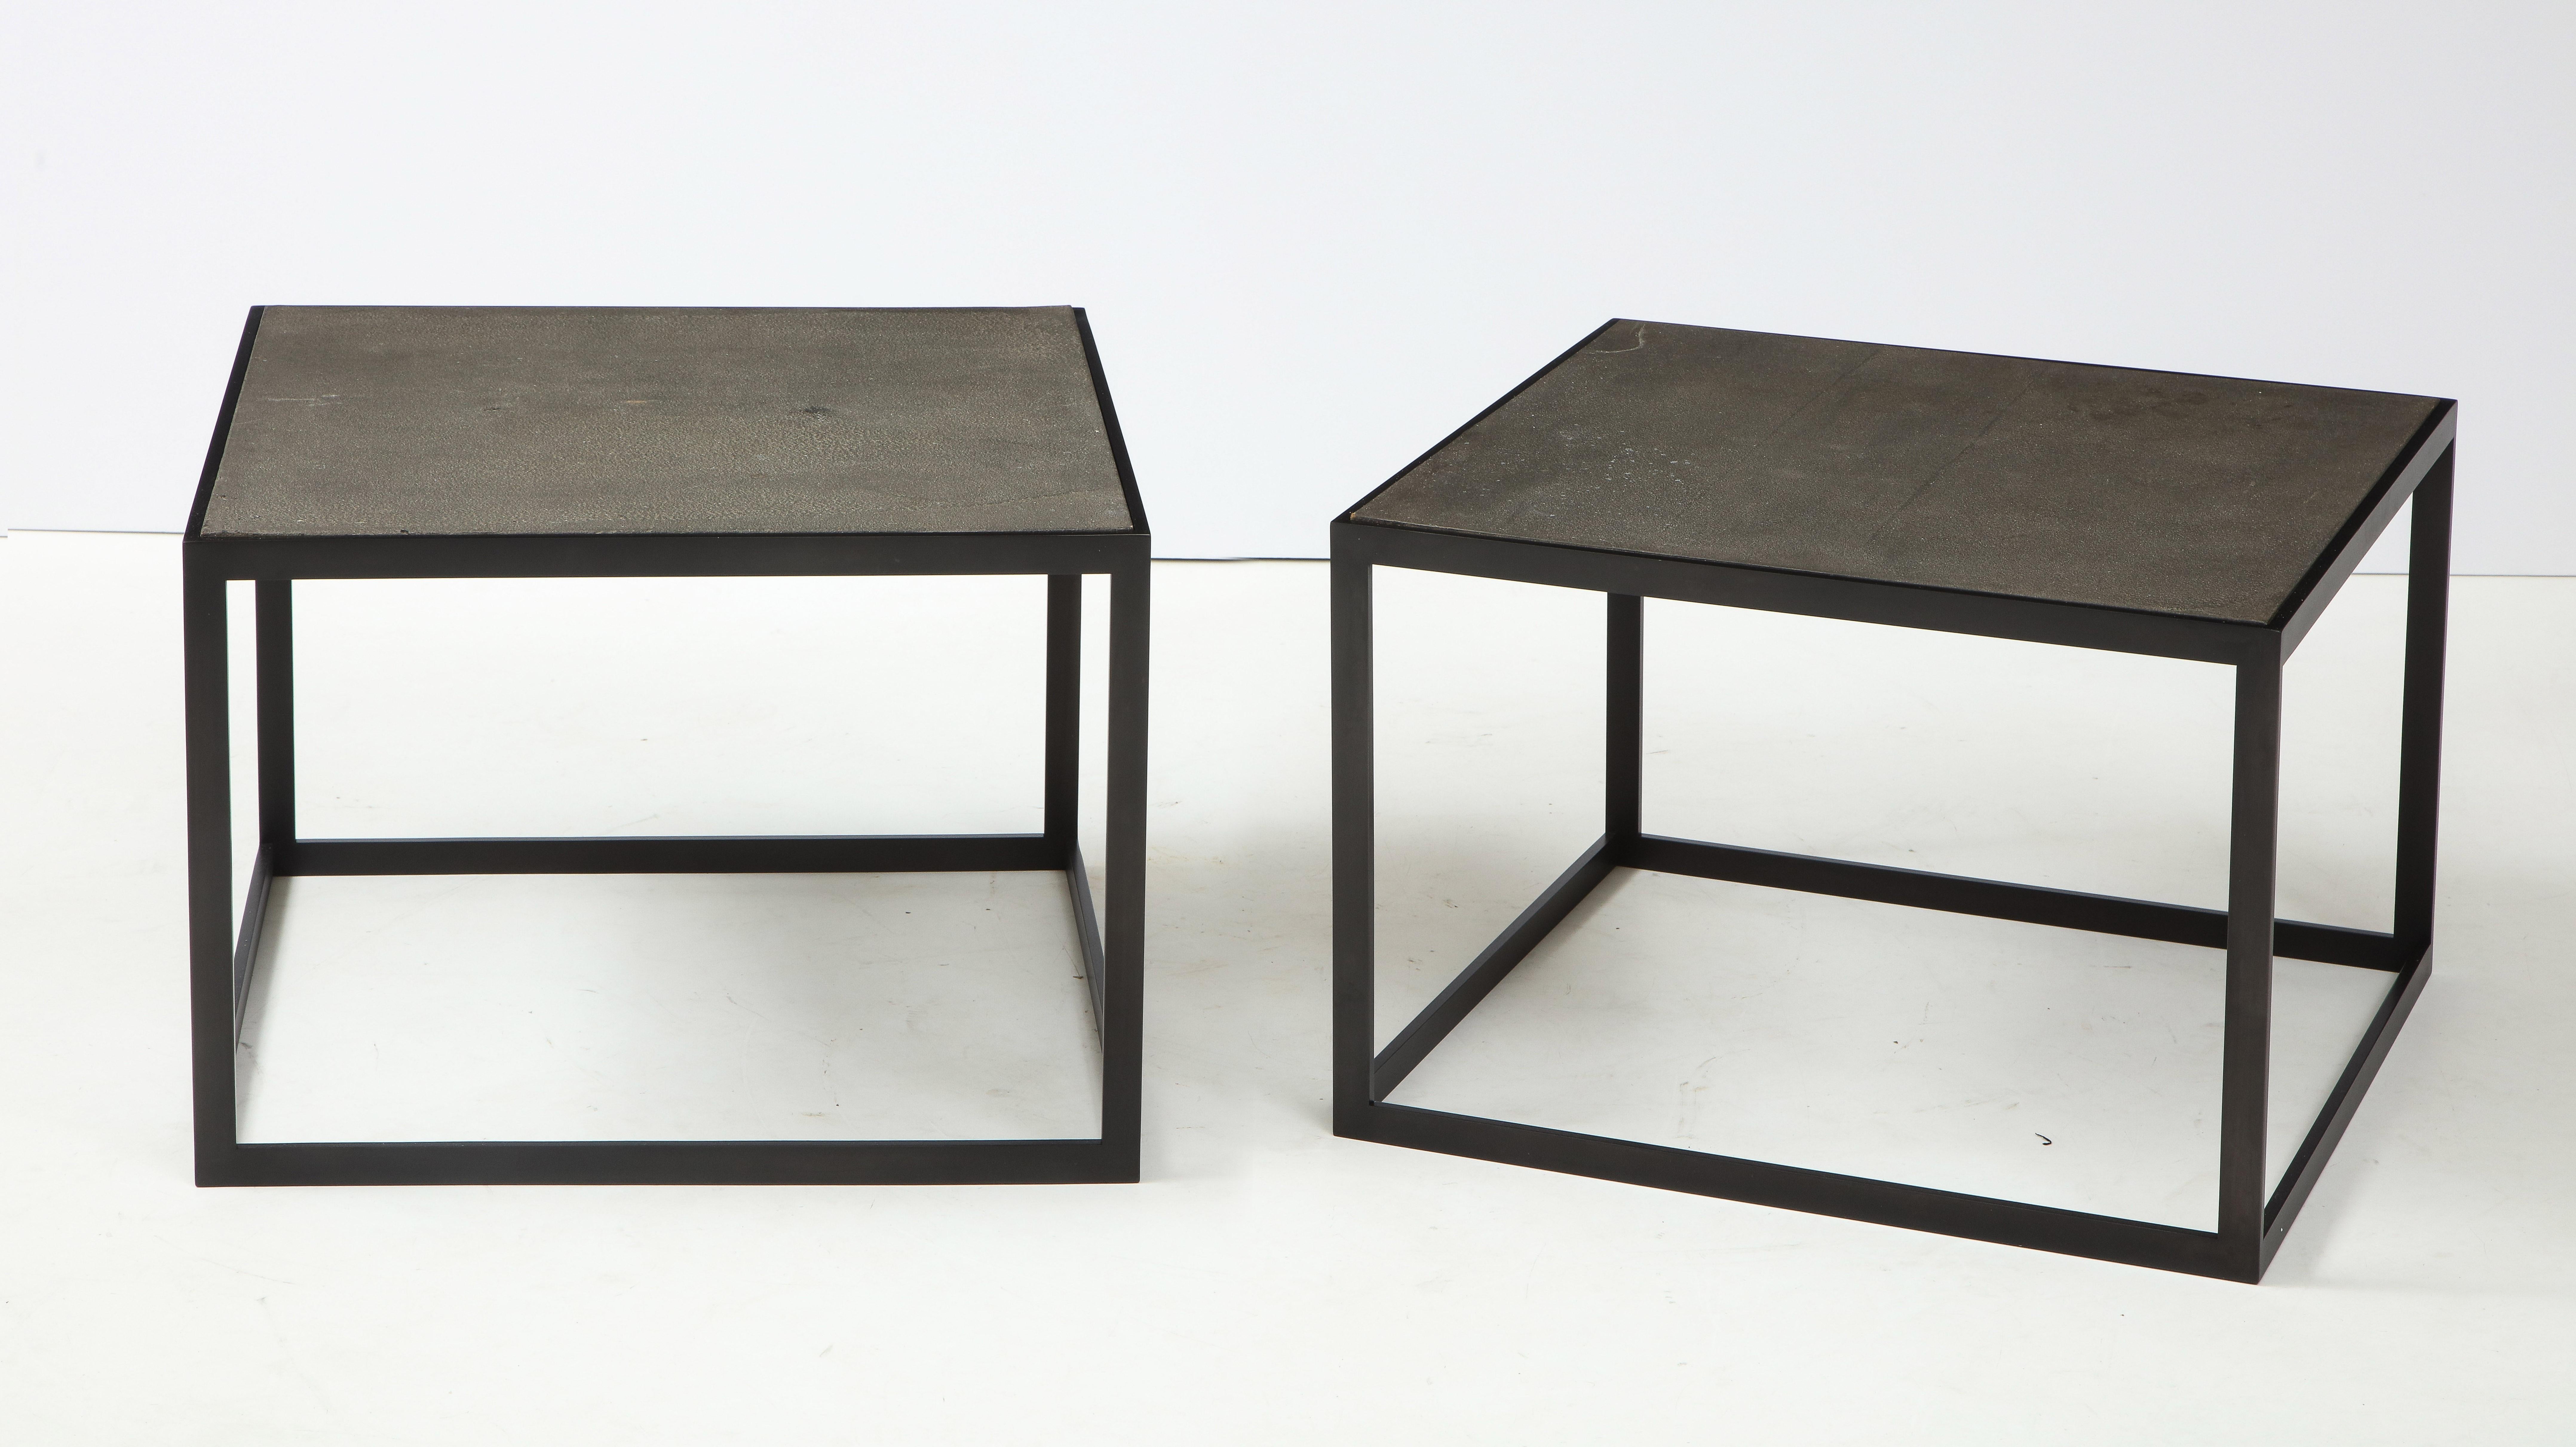 'Thin' table, custom, made to order coffee side tables
Hand made & blackened base with stonema rblewood top
Available in various materials, sizes & finishes
Measures: H: 16.75 D: 23.25 W: 23.25 in.